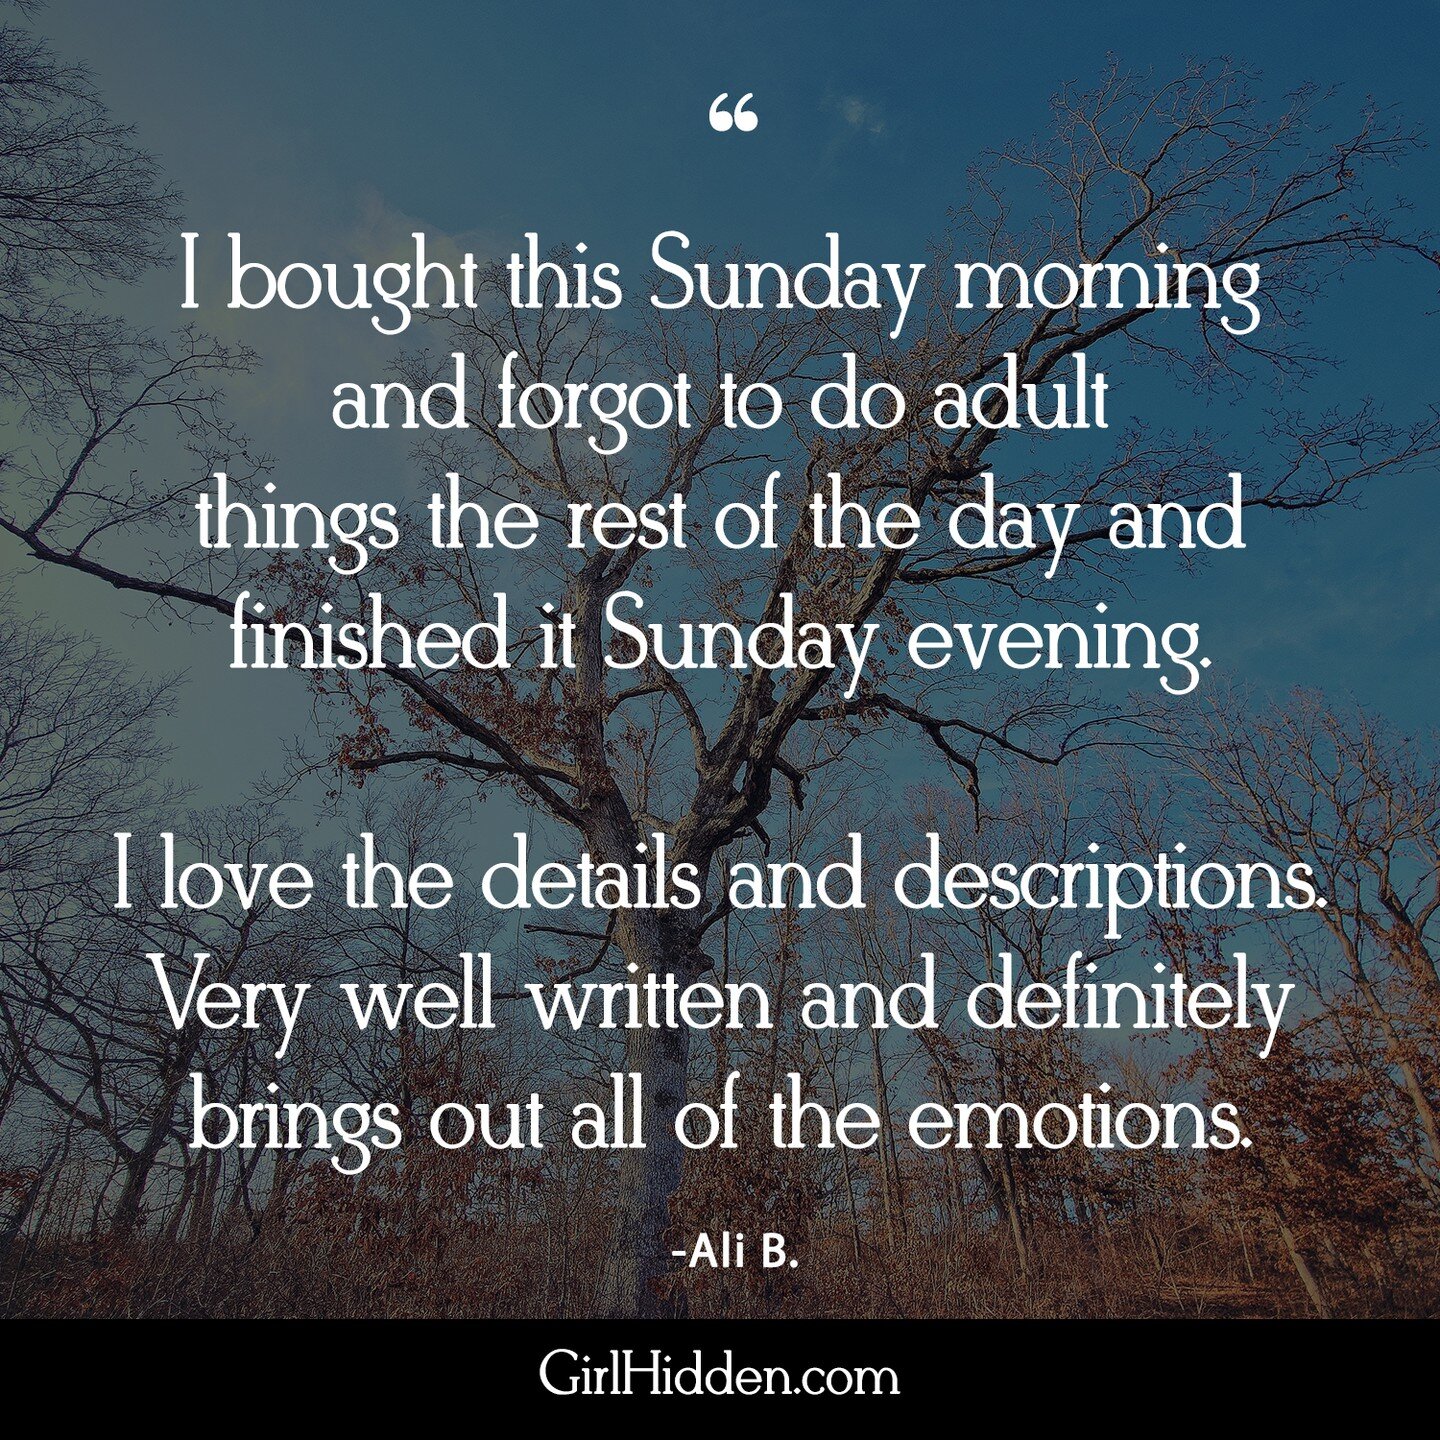 &quot;I bought this Sunday morning and forgot to do adult things the rest of the day and finished it Sunday evening. I love the details and descriptions. 
Very well written and definitely brings out all of the emotions. I cannot imagine going through